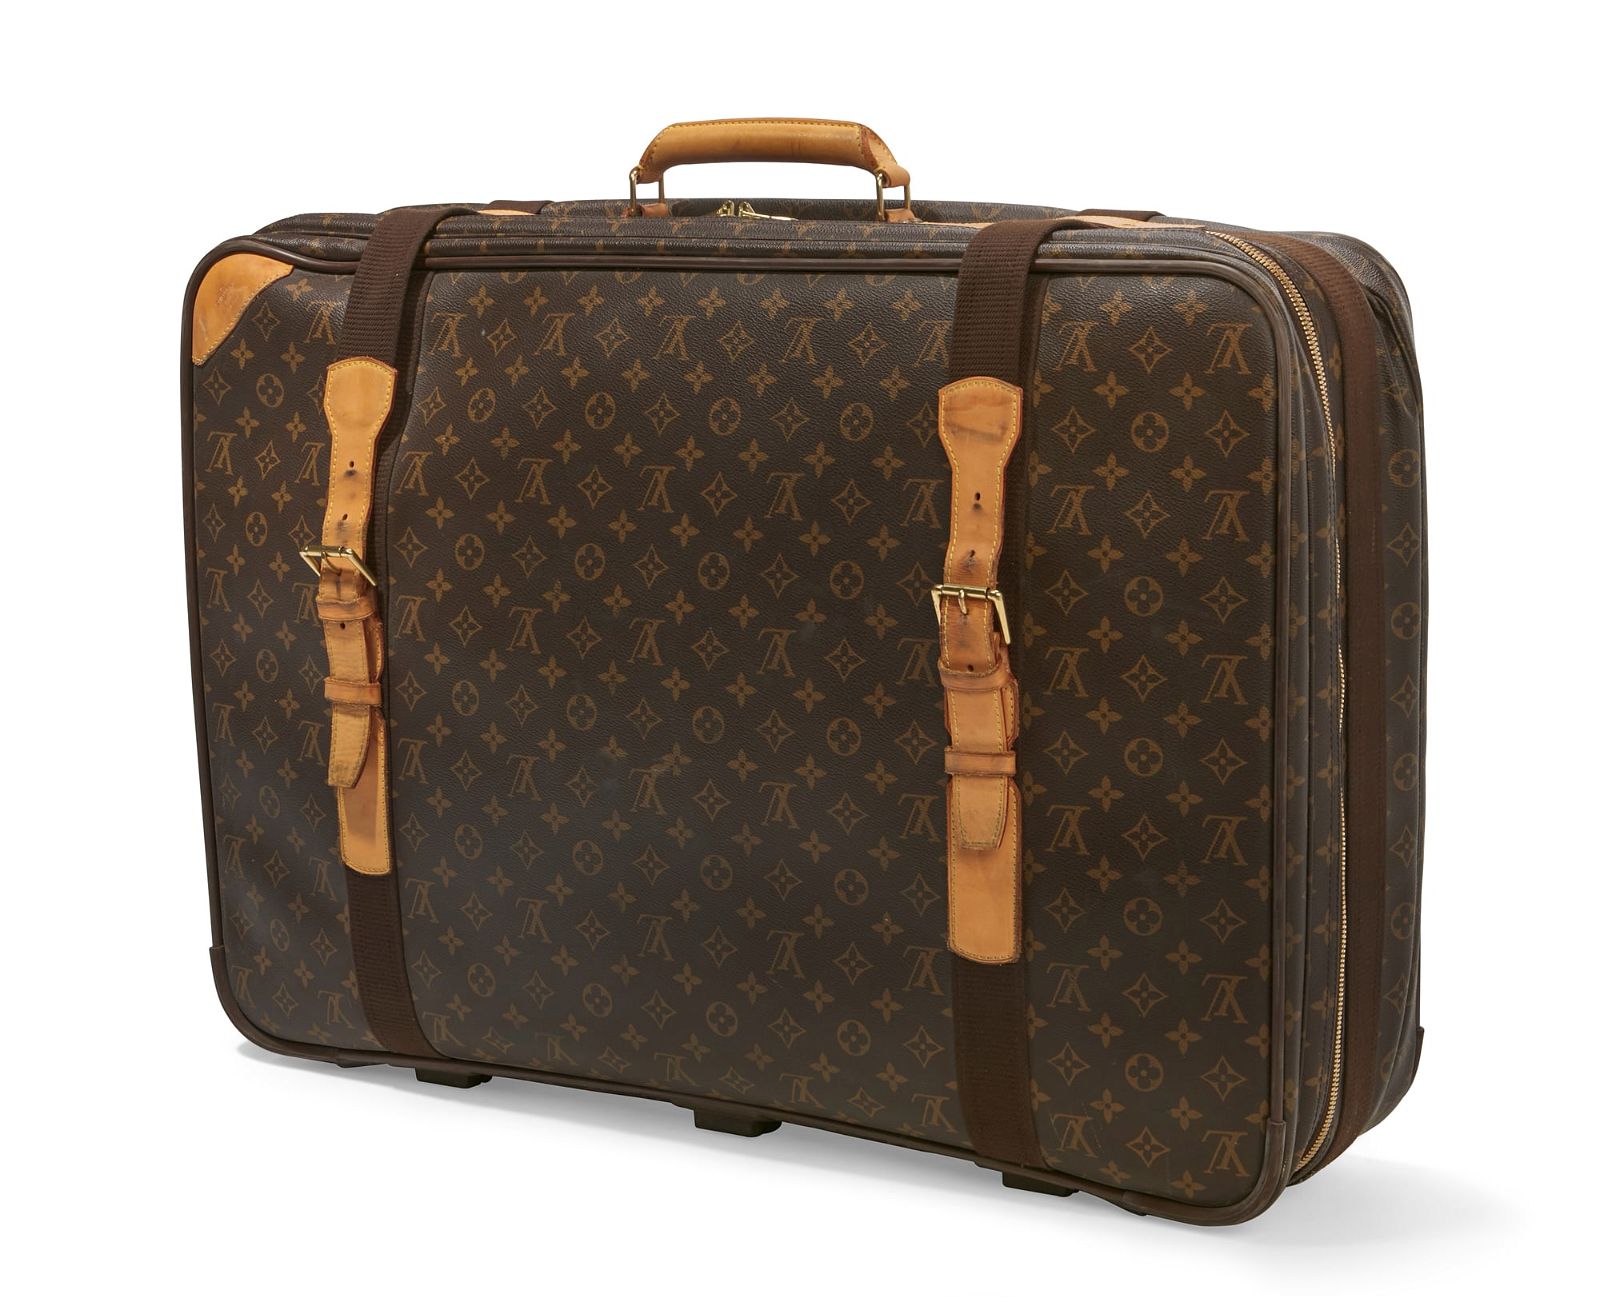 A LOUIS VUITTON SOFT SIDED SUITCASEA